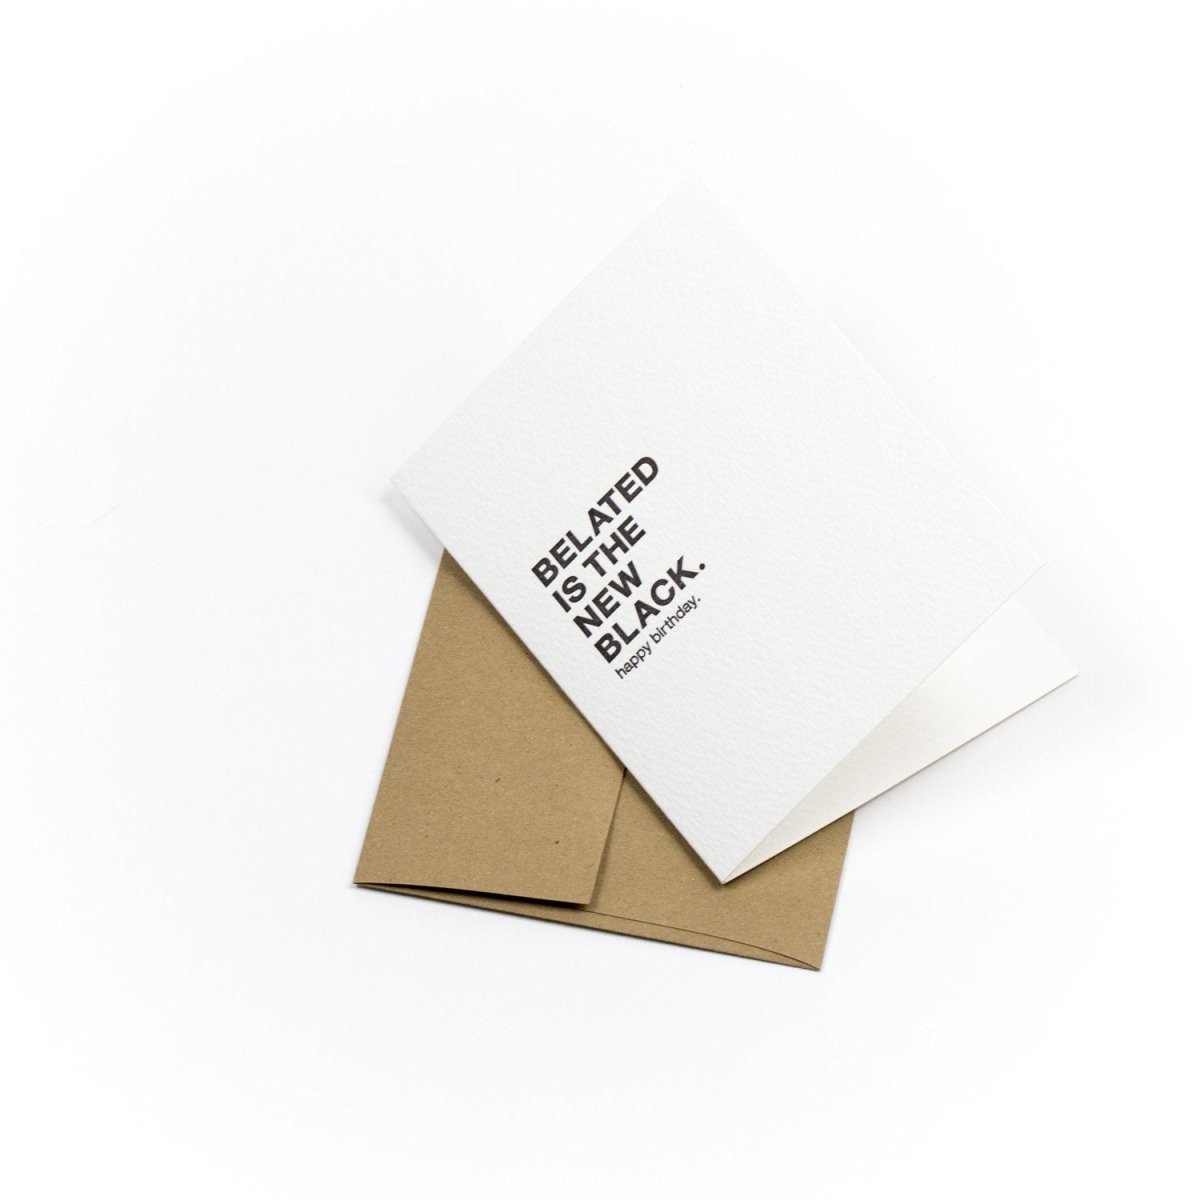 Kraft card with black text that reads: "BELATED IS THE NEW BLACK. HAPPY BIRTHDAY." Designed and made by Sapling Press in Pittsburgh, PA.